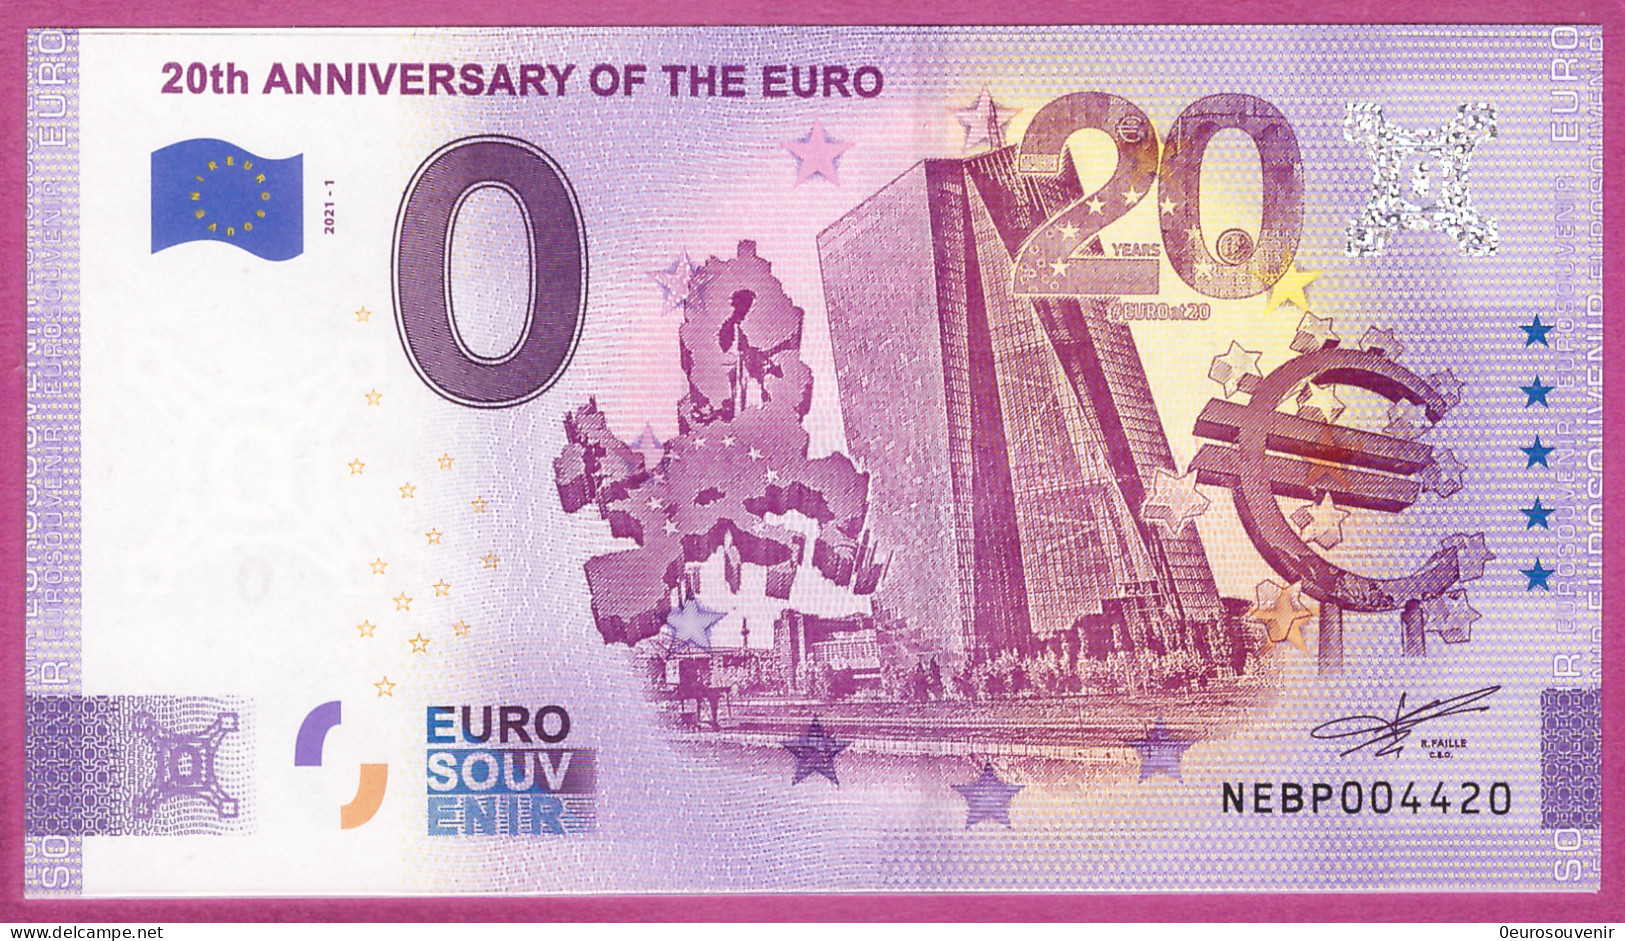 0-Euro NEBP 2021-1  20th ANNIVERSARY OF THE EURO - Private Proofs / Unofficial